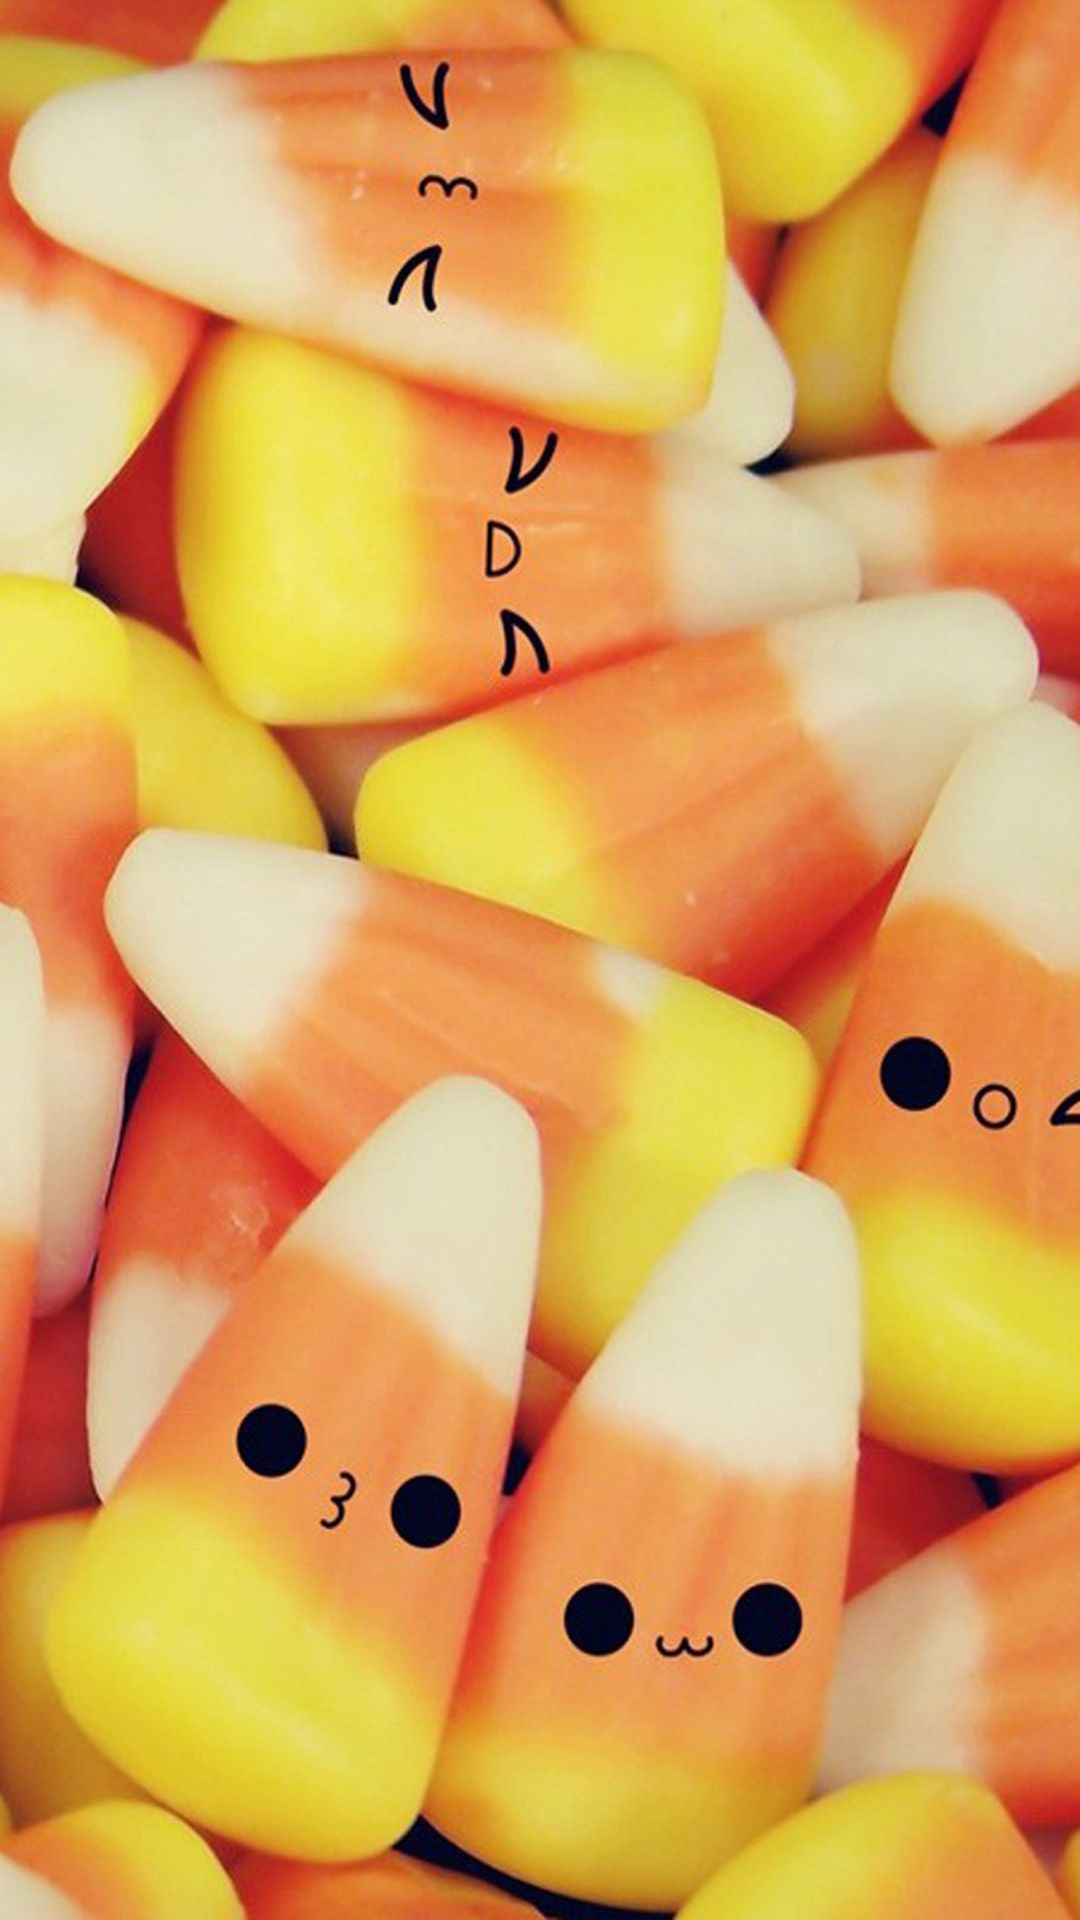 Cute Candy iPhone 6 Wallpaper Download | iPhone Wallpapers, iPad ...